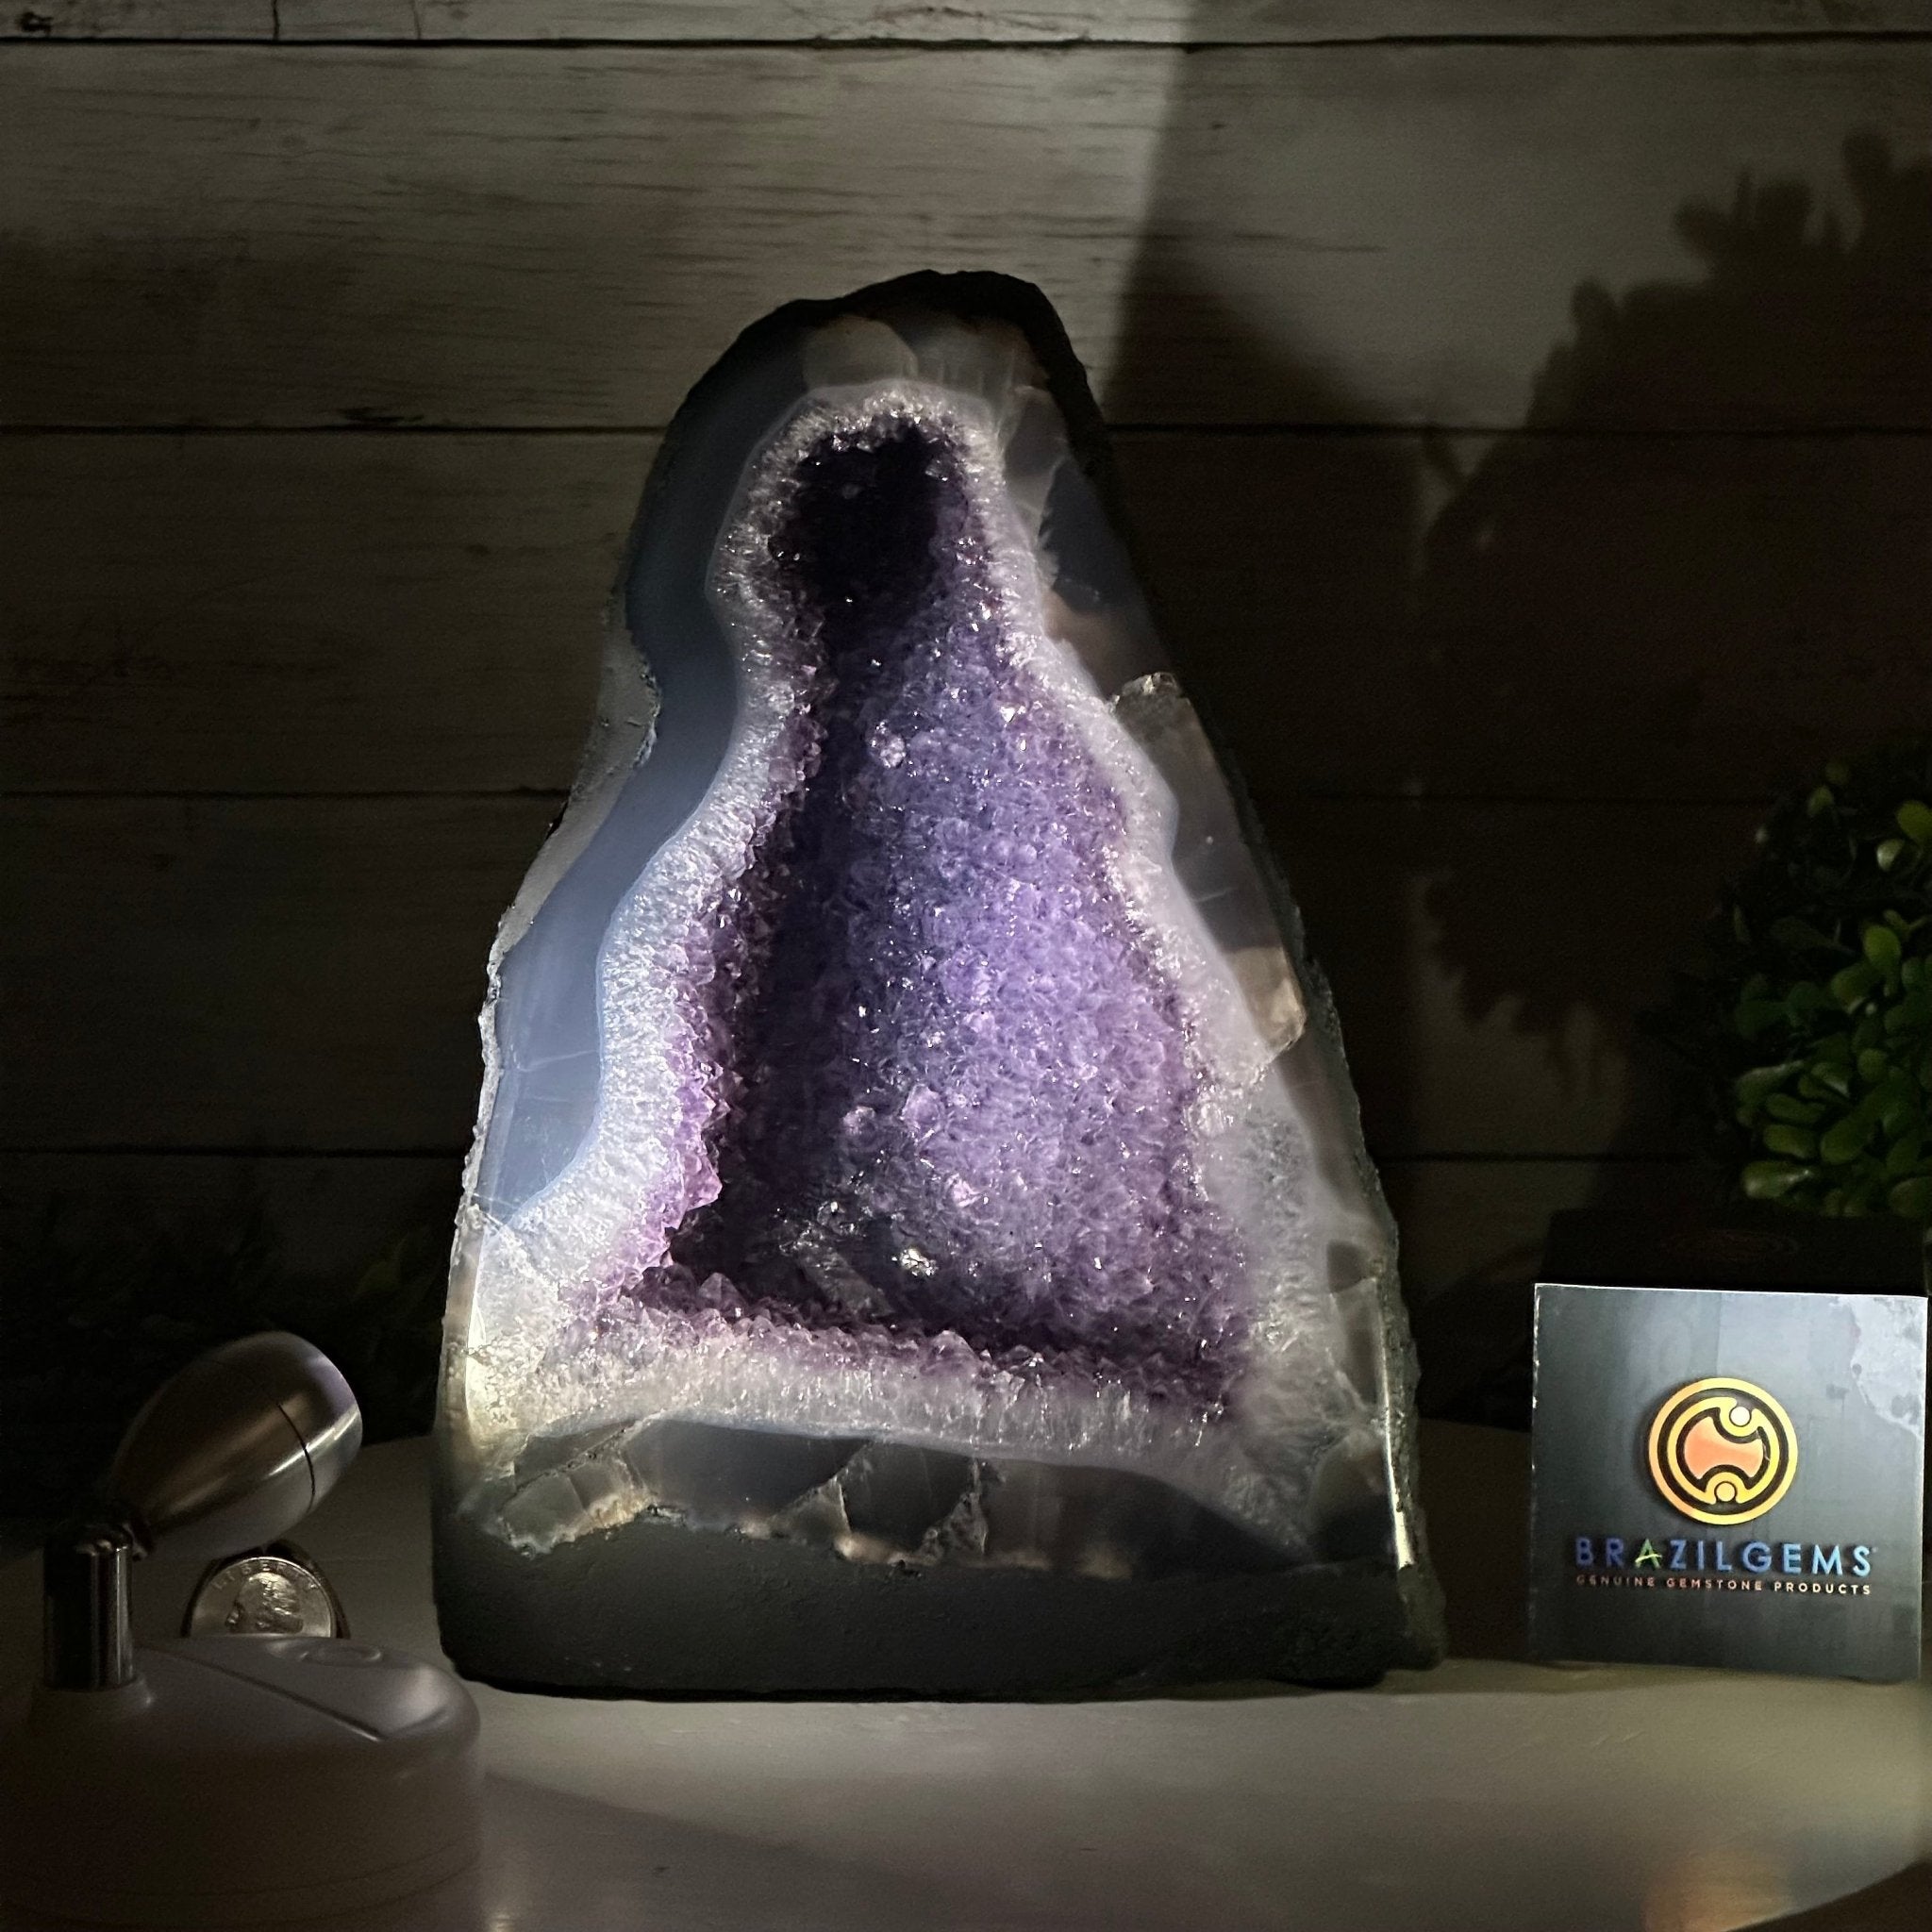 Quality Brazilian Amethyst Cathedral, 10.2 lbs & 9.3" Tall, #5601 - 1351 - Brazil GemsBrazil GemsQuality Brazilian Amethyst Cathedral, 10.2 lbs & 9.3" Tall, #5601 - 1351Cathedrals5601 - 1351